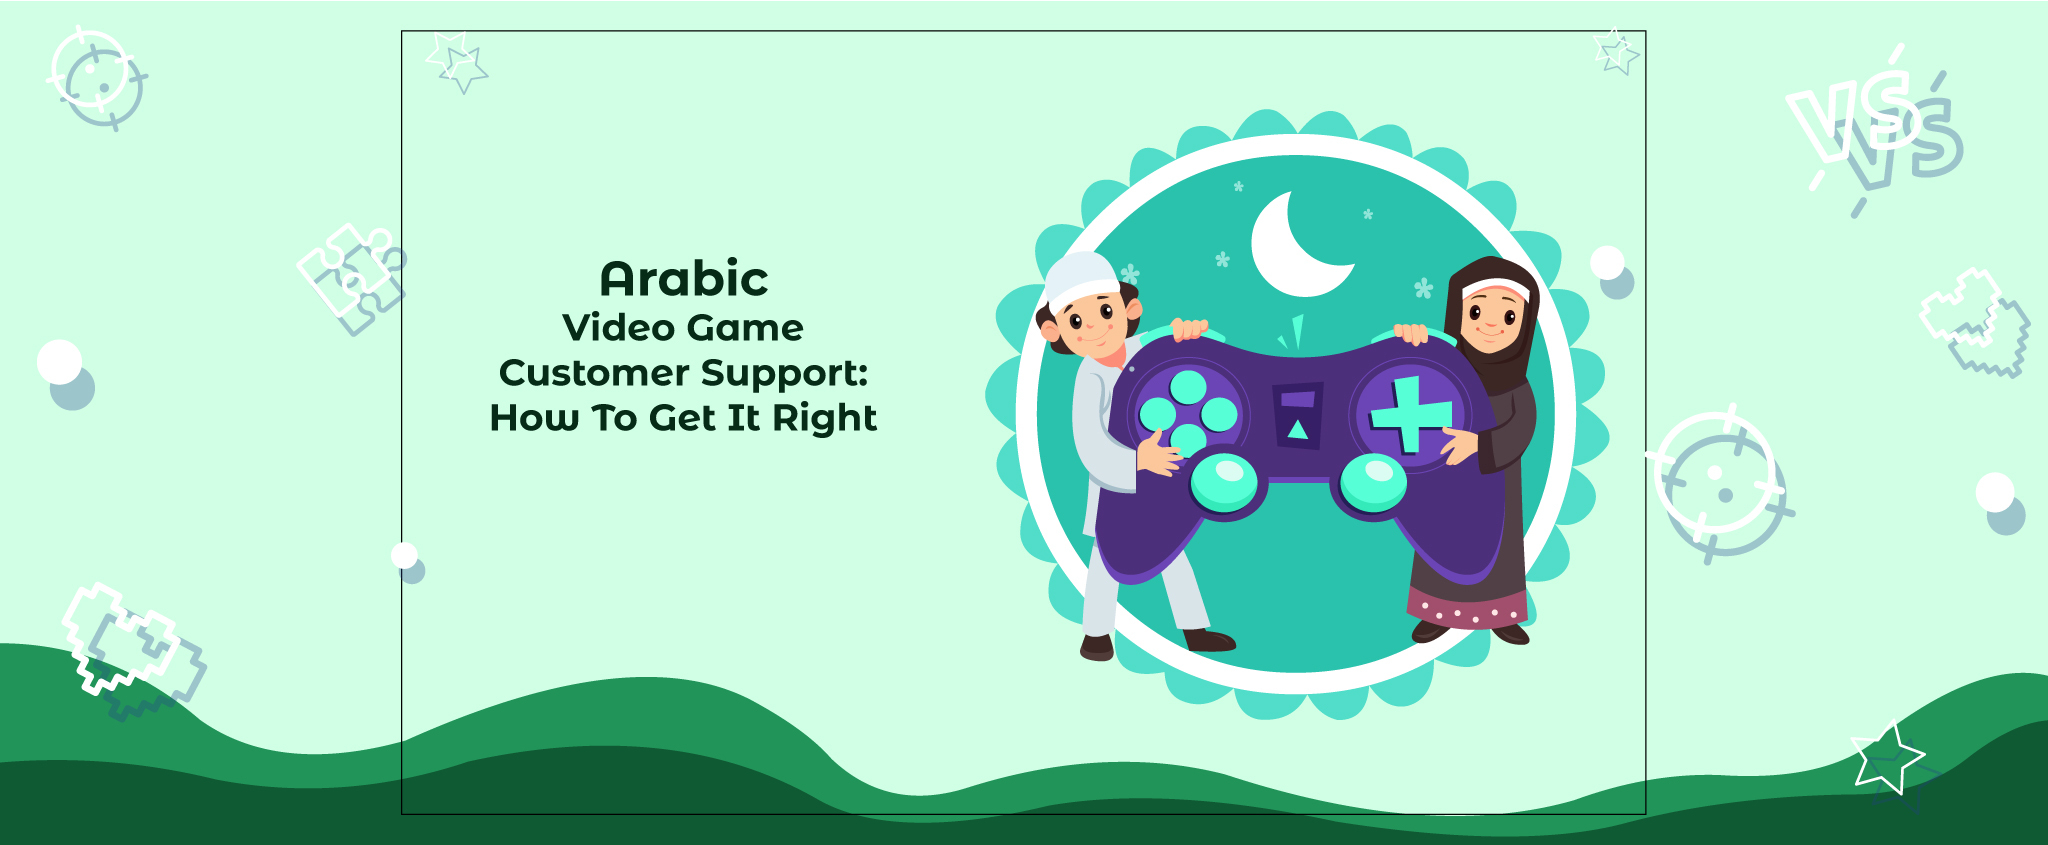 Arabic Video Game Customer Support - How To Get It Right